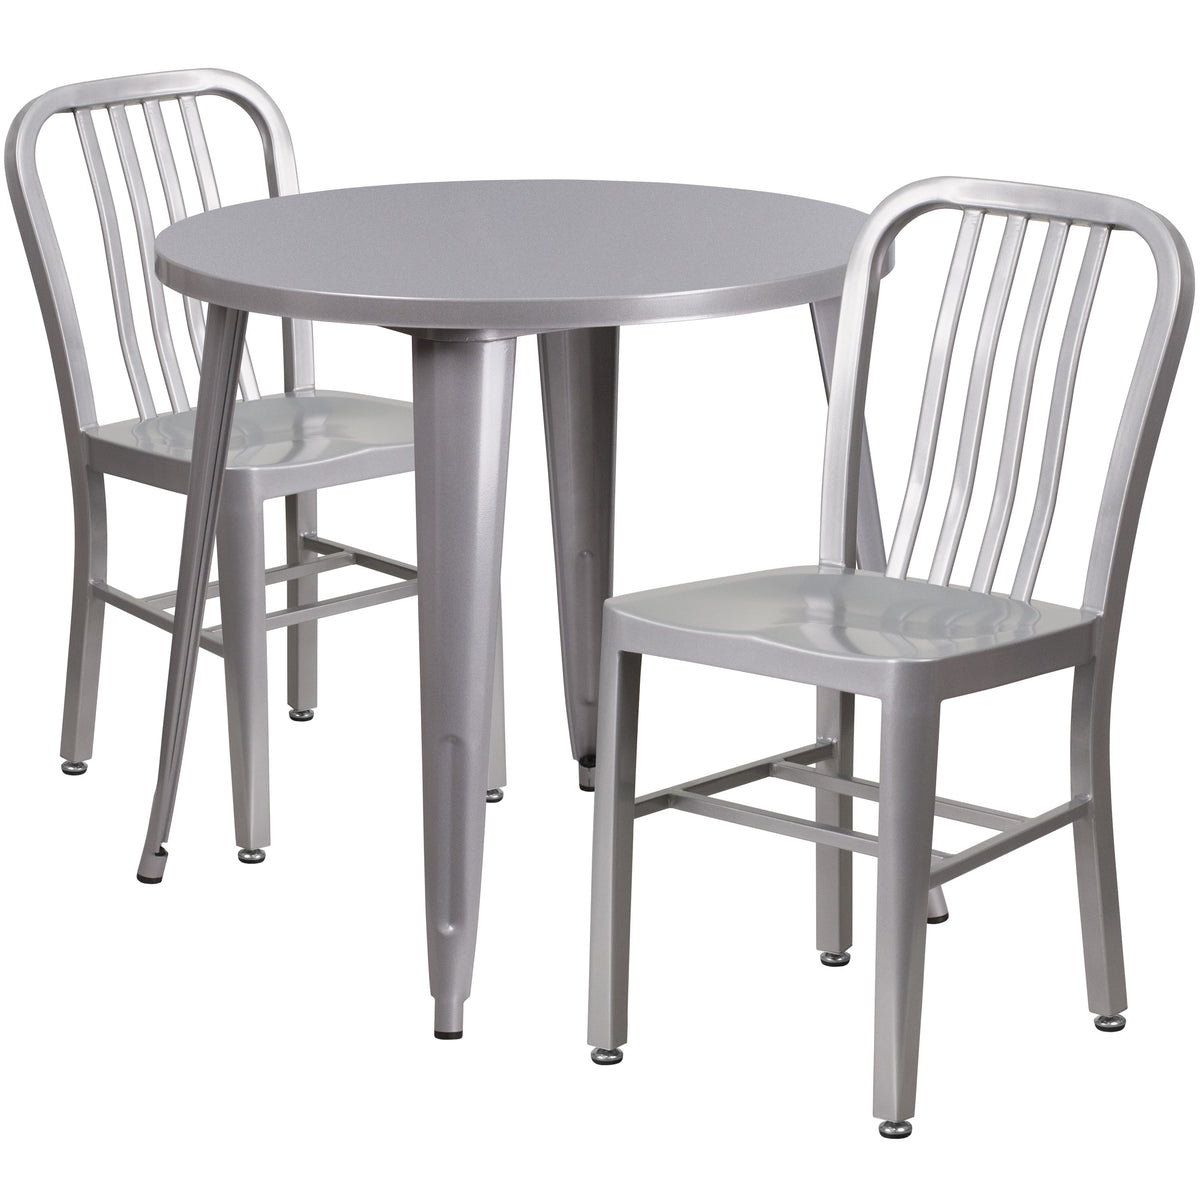 Silver |#| 30inch Round Silver Metal Indoor-Outdoor Table Set with 2 Vertical Slat Back Chairs